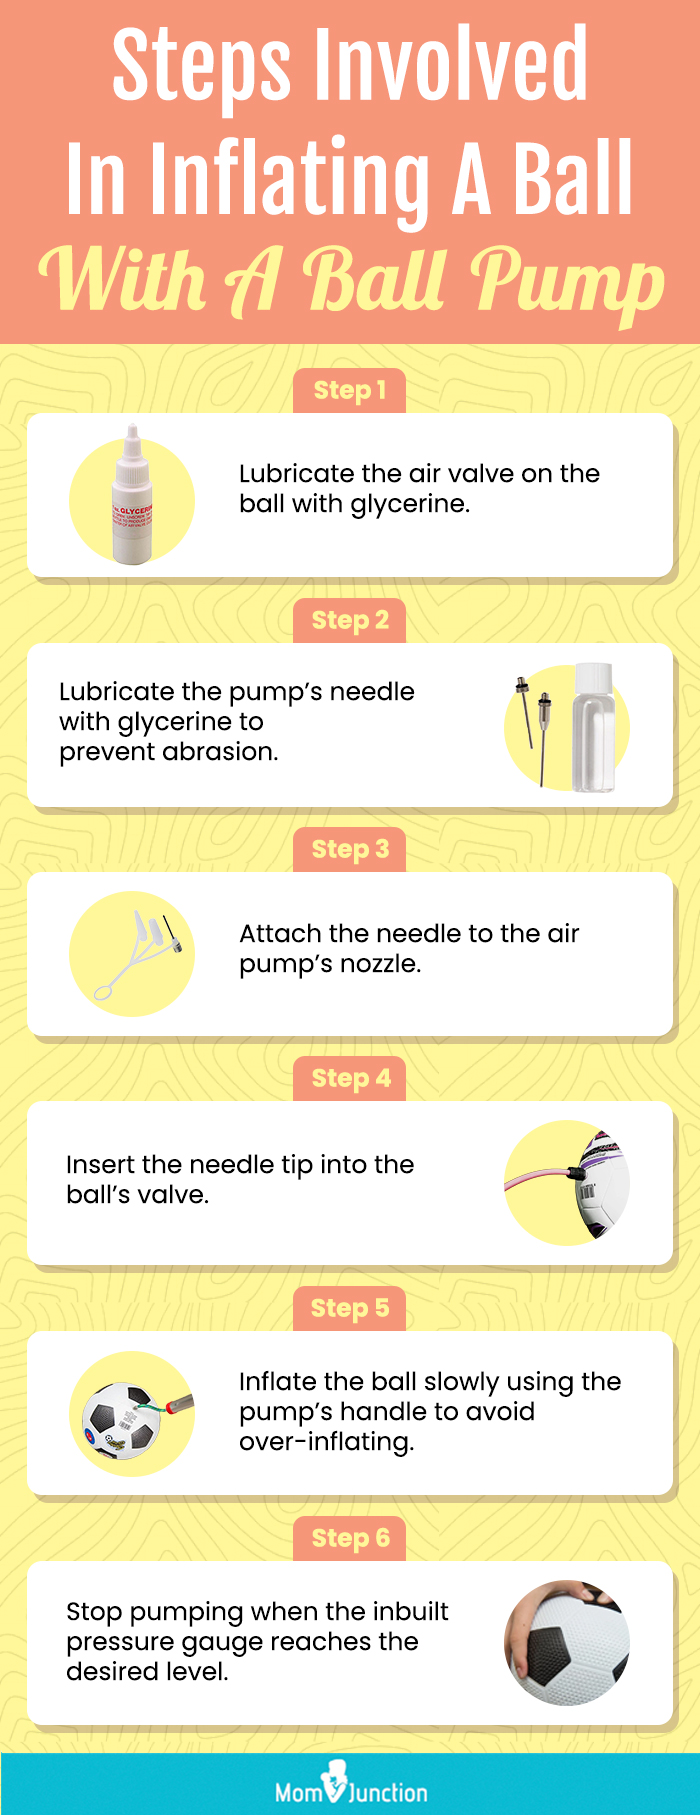 Steps Involved In Inflating A Ball With A Ball Pump (infographic)